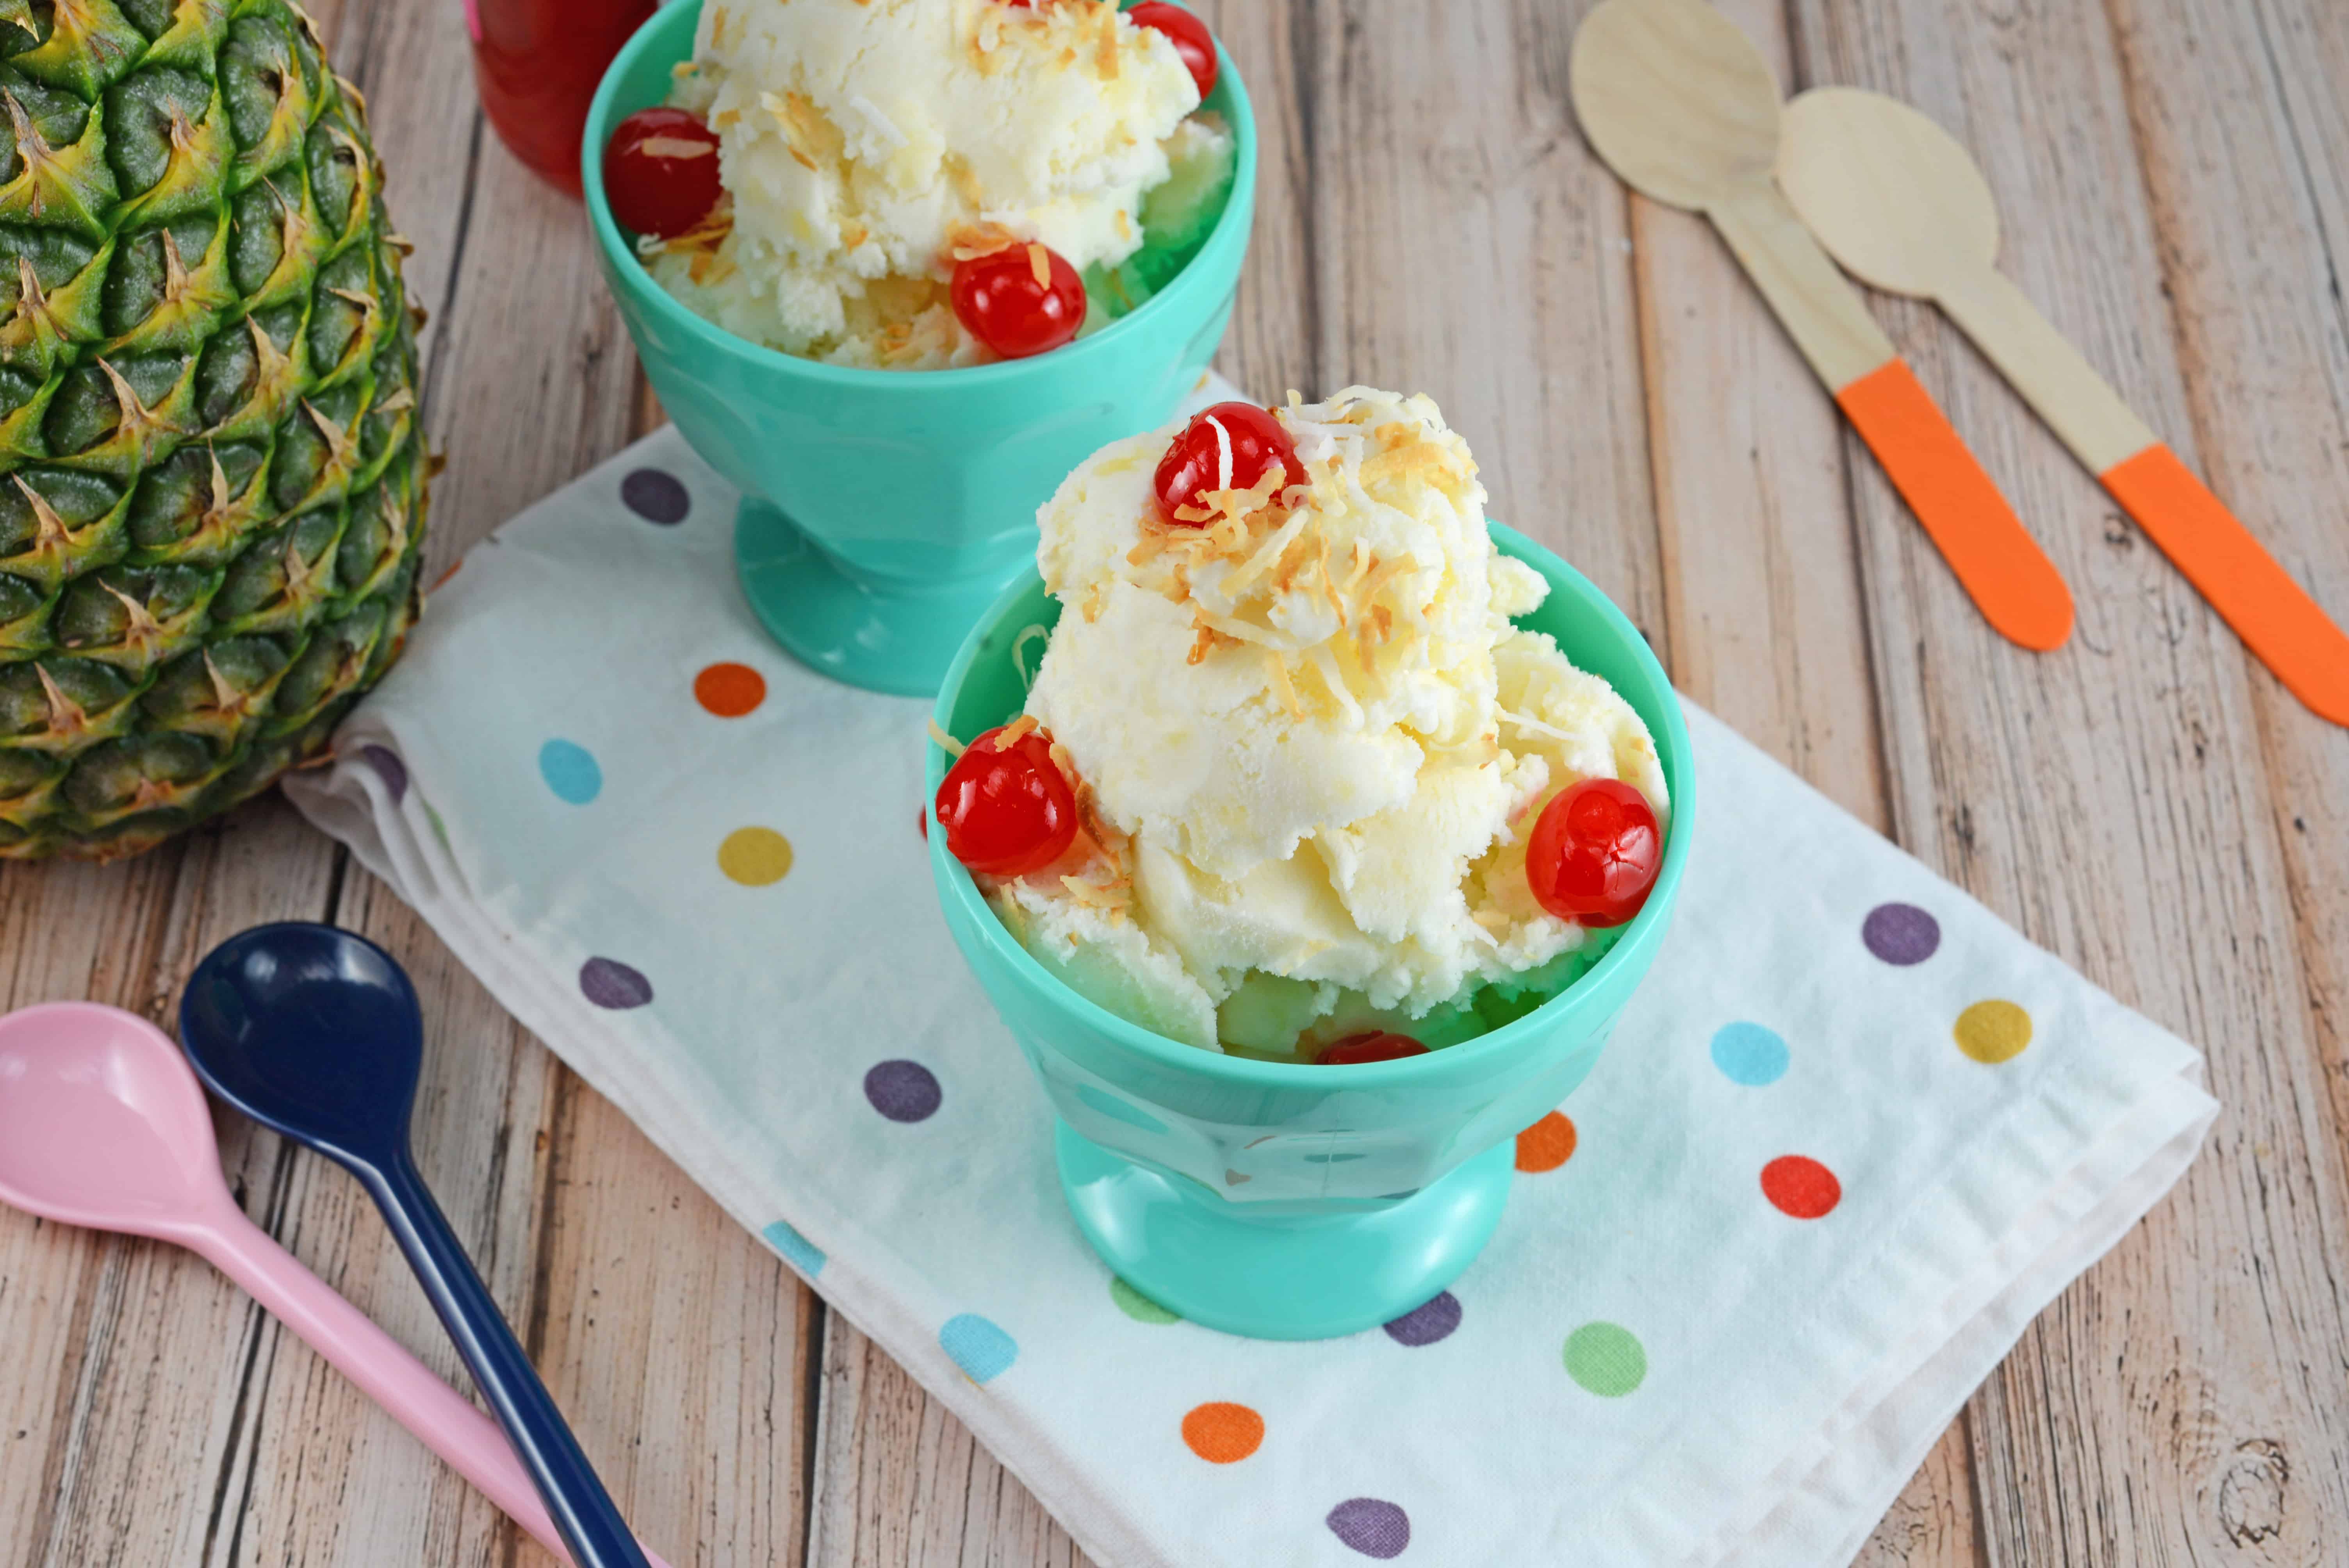 pina colada ice cream in a teal ice cream bowl with cherries 